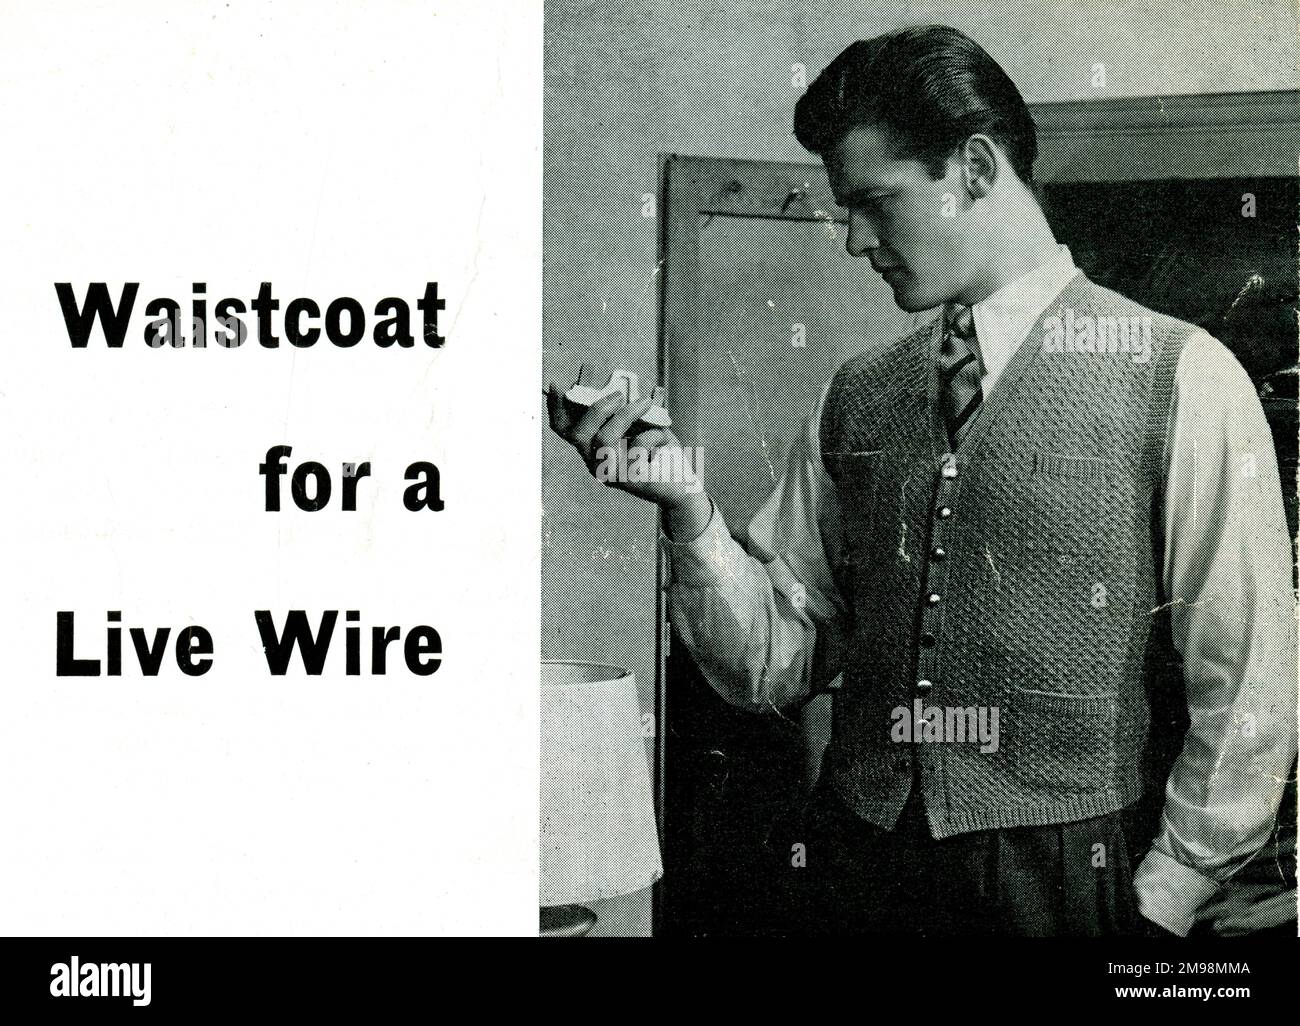 Knitting pattern, Waistcoat for a Live Wire, modelled by Roger Moore. Stock Photo